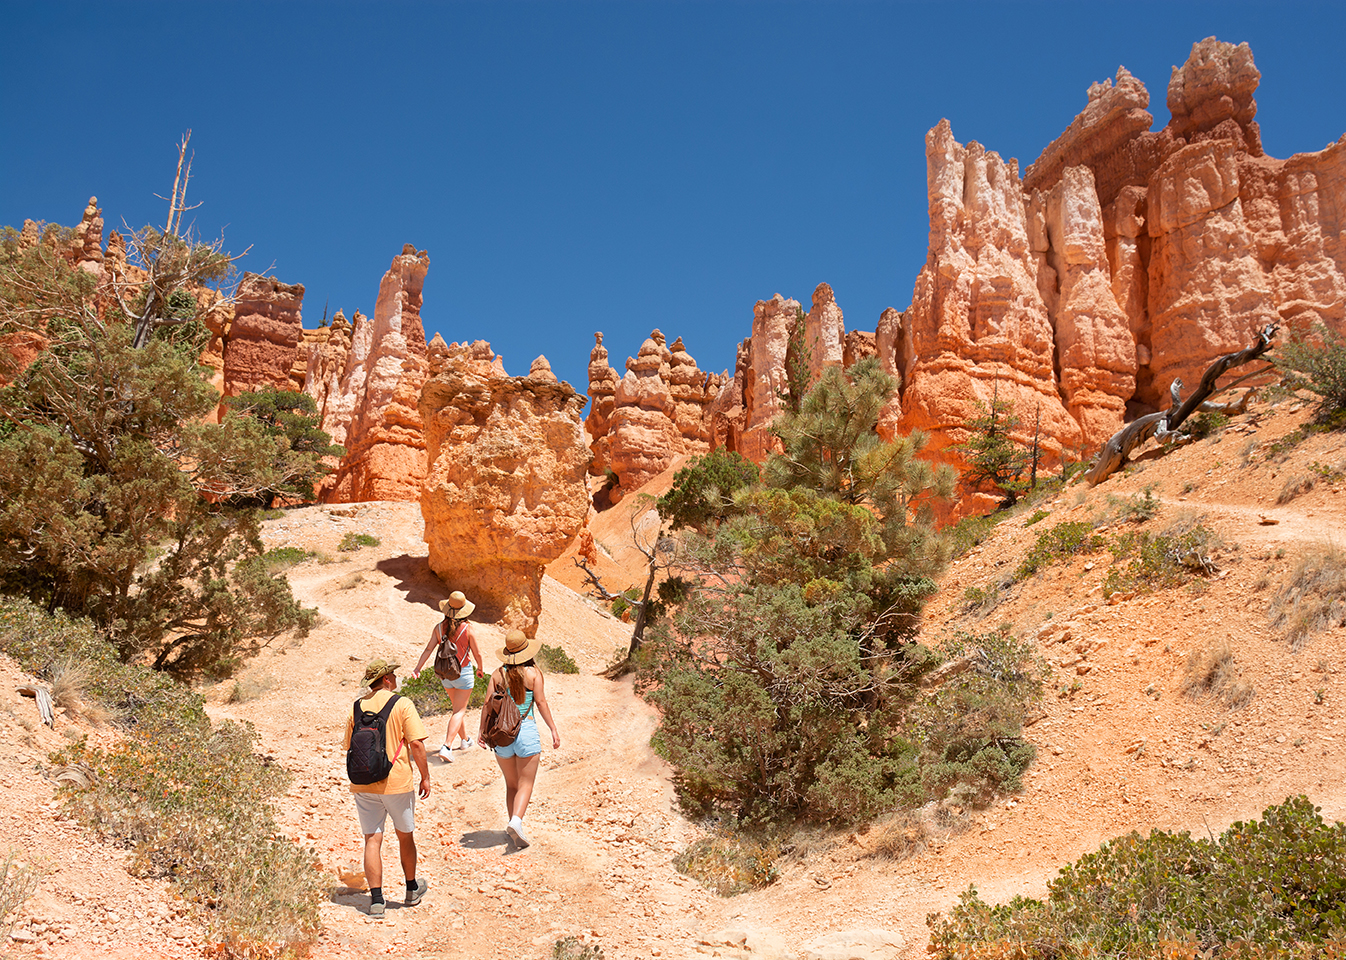 A trio of hikers ascend a slope toward craggy rock arches.